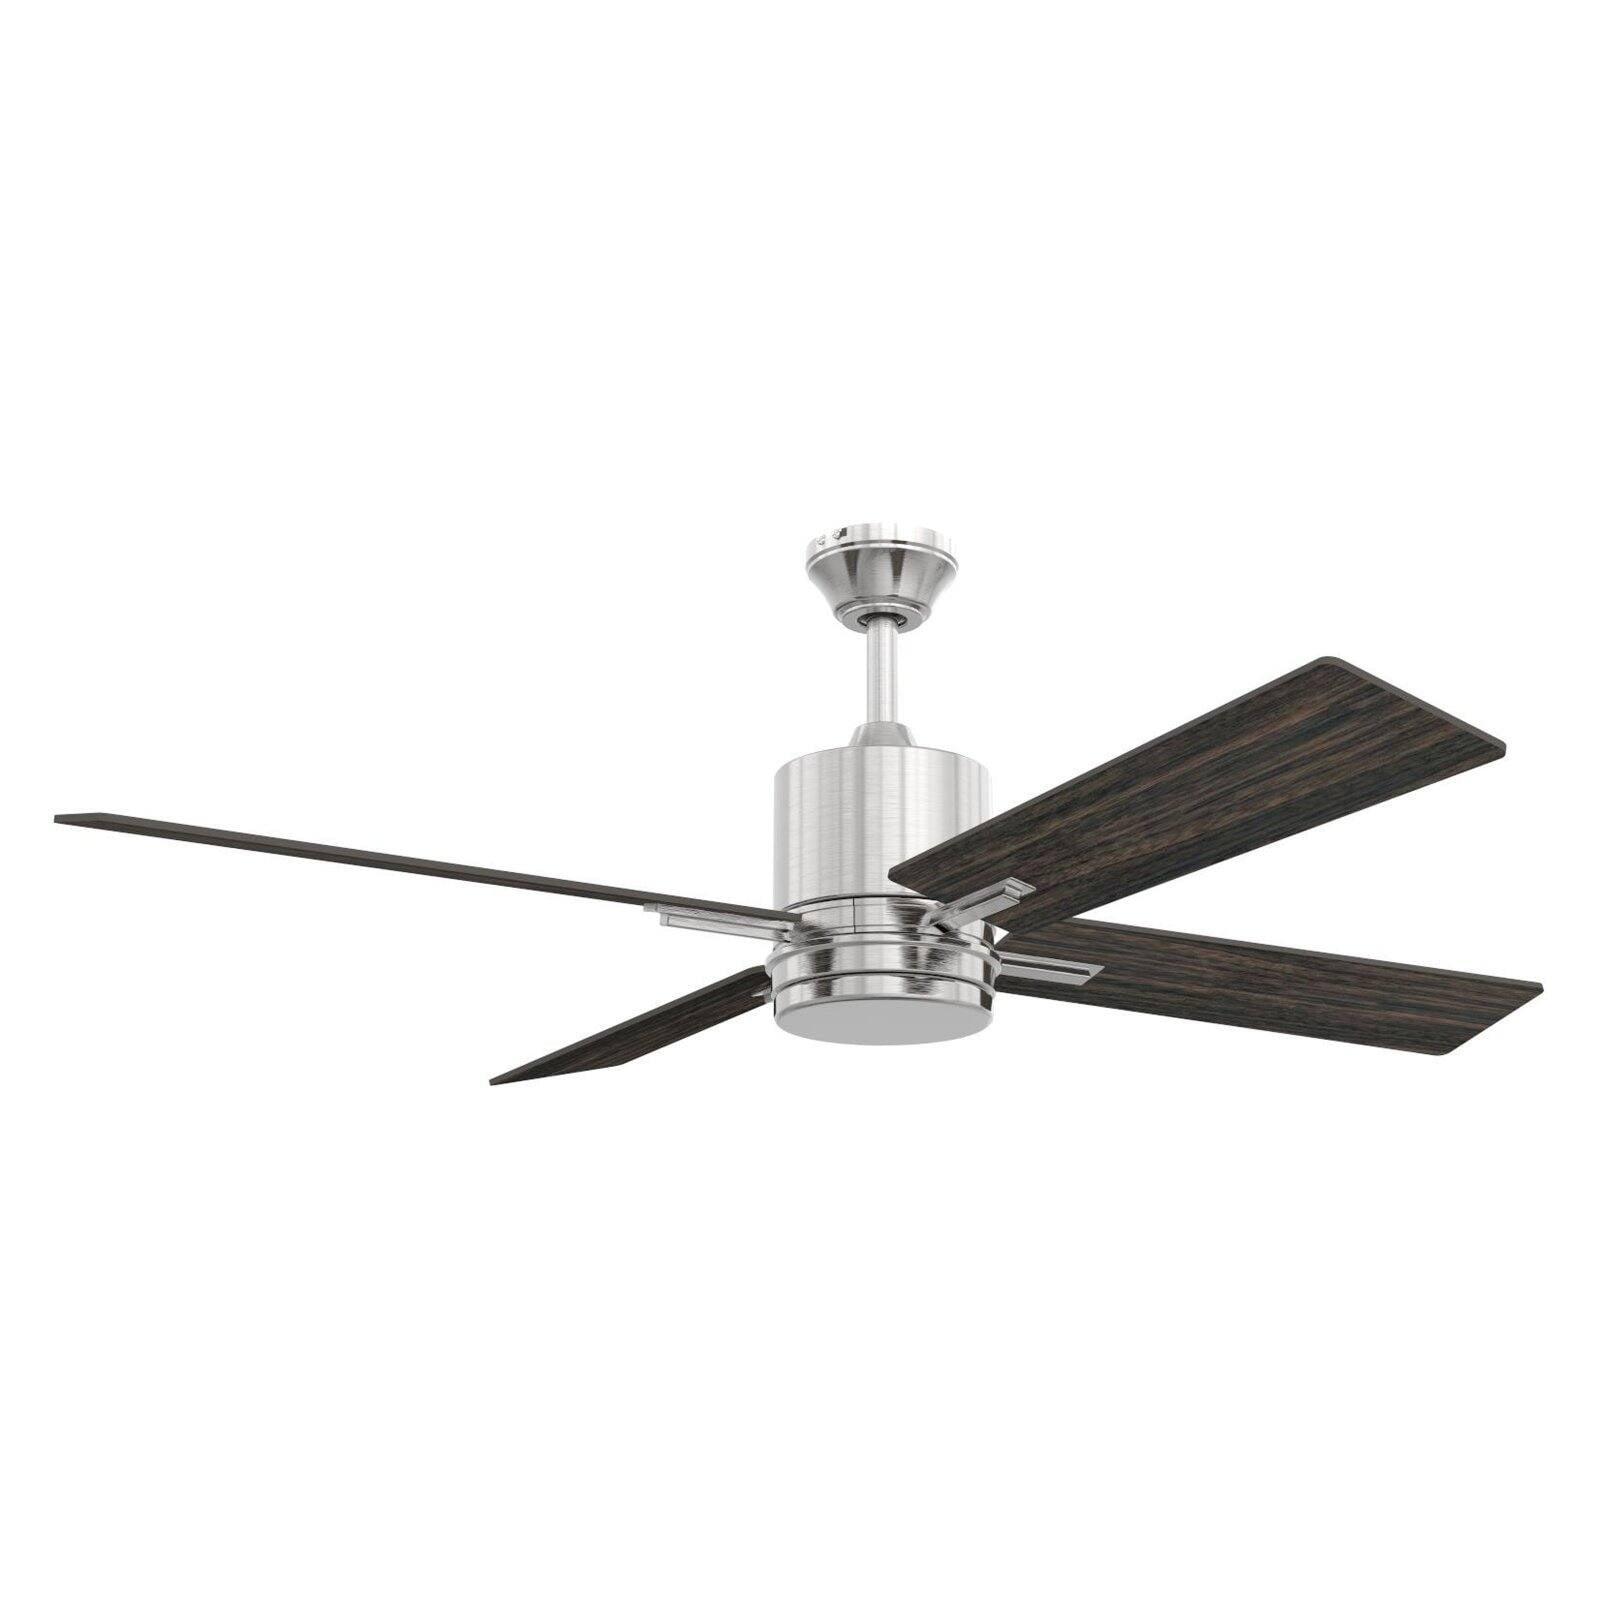 Transitional 52" White Low Profile Ceiling Fan with LED Light